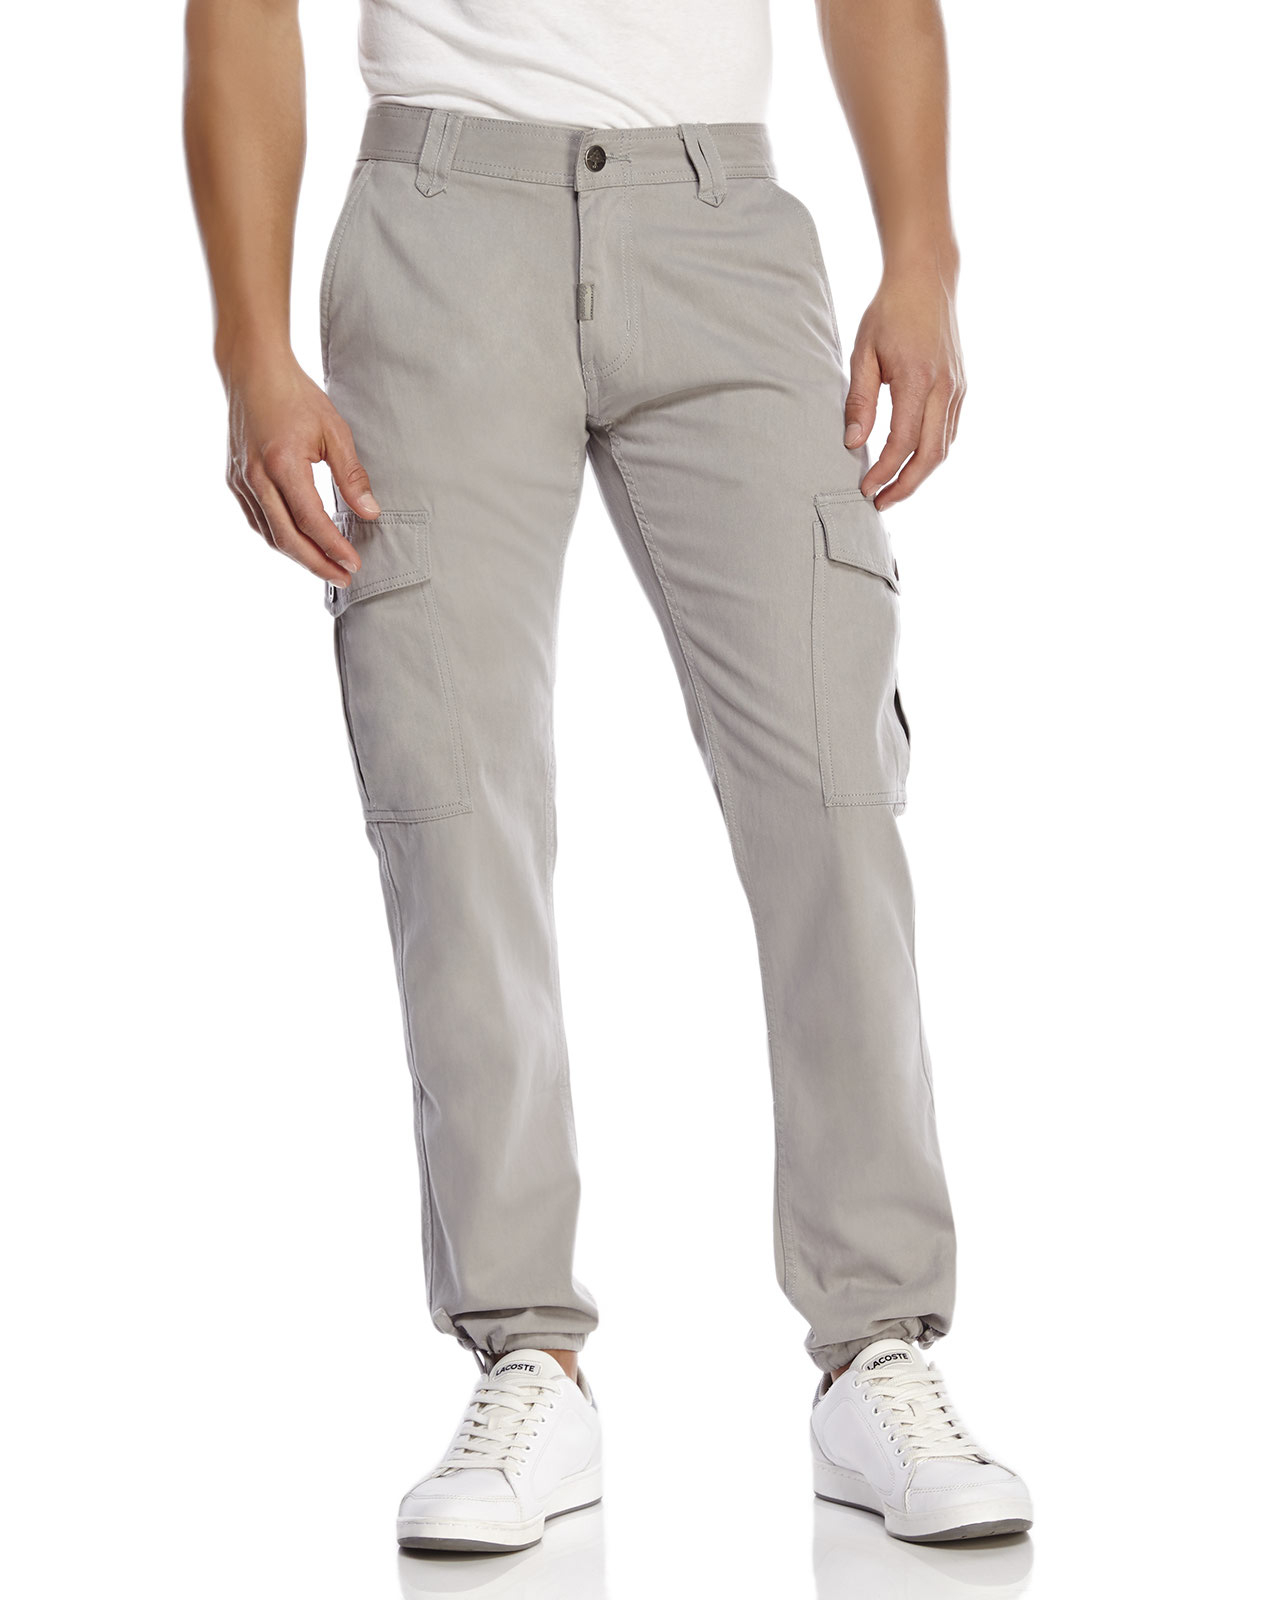 Lyst - Lrg Tapered Cargo Pants in Gray for Men